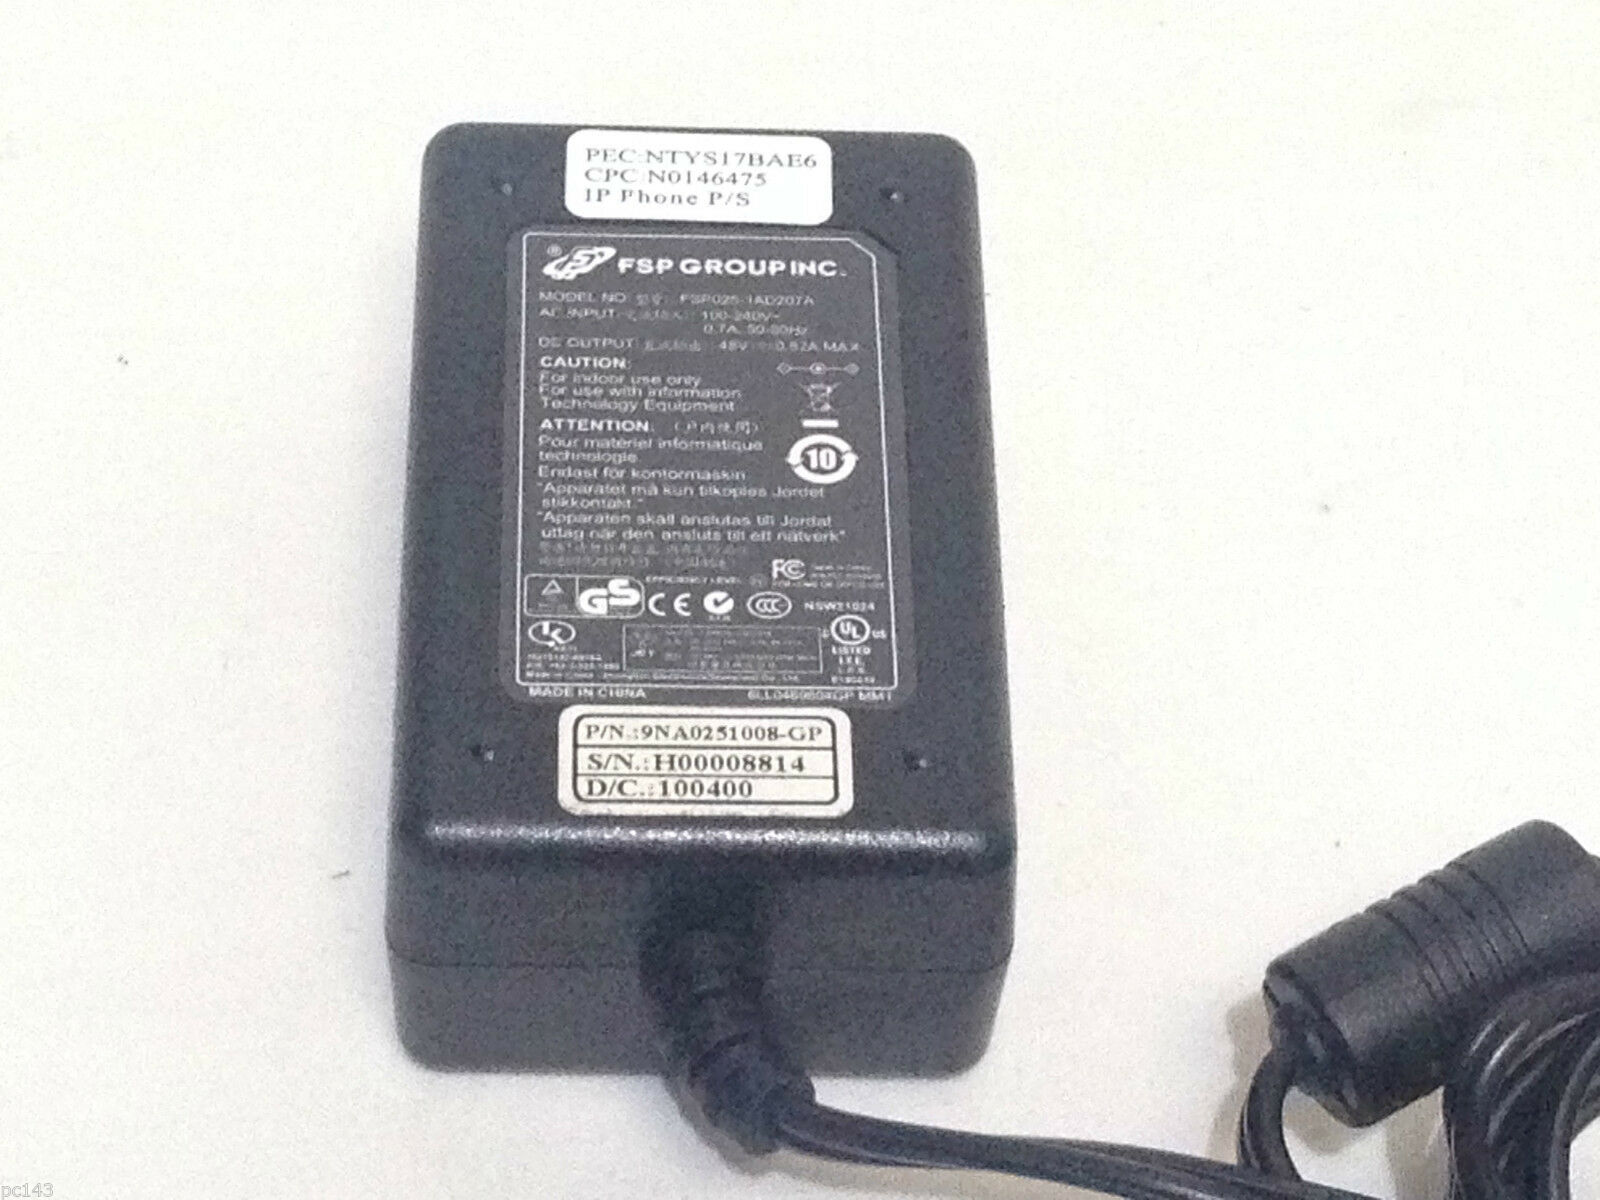 9NA0903503 9NA0903501 Switching Power Supply Cord Cable Charger Mains PSU Model No. Digipartspower 4-PiN AC/DC Adapter for FSP Group INC FSP090-DMBC1 FSP090DMBC1 P/N